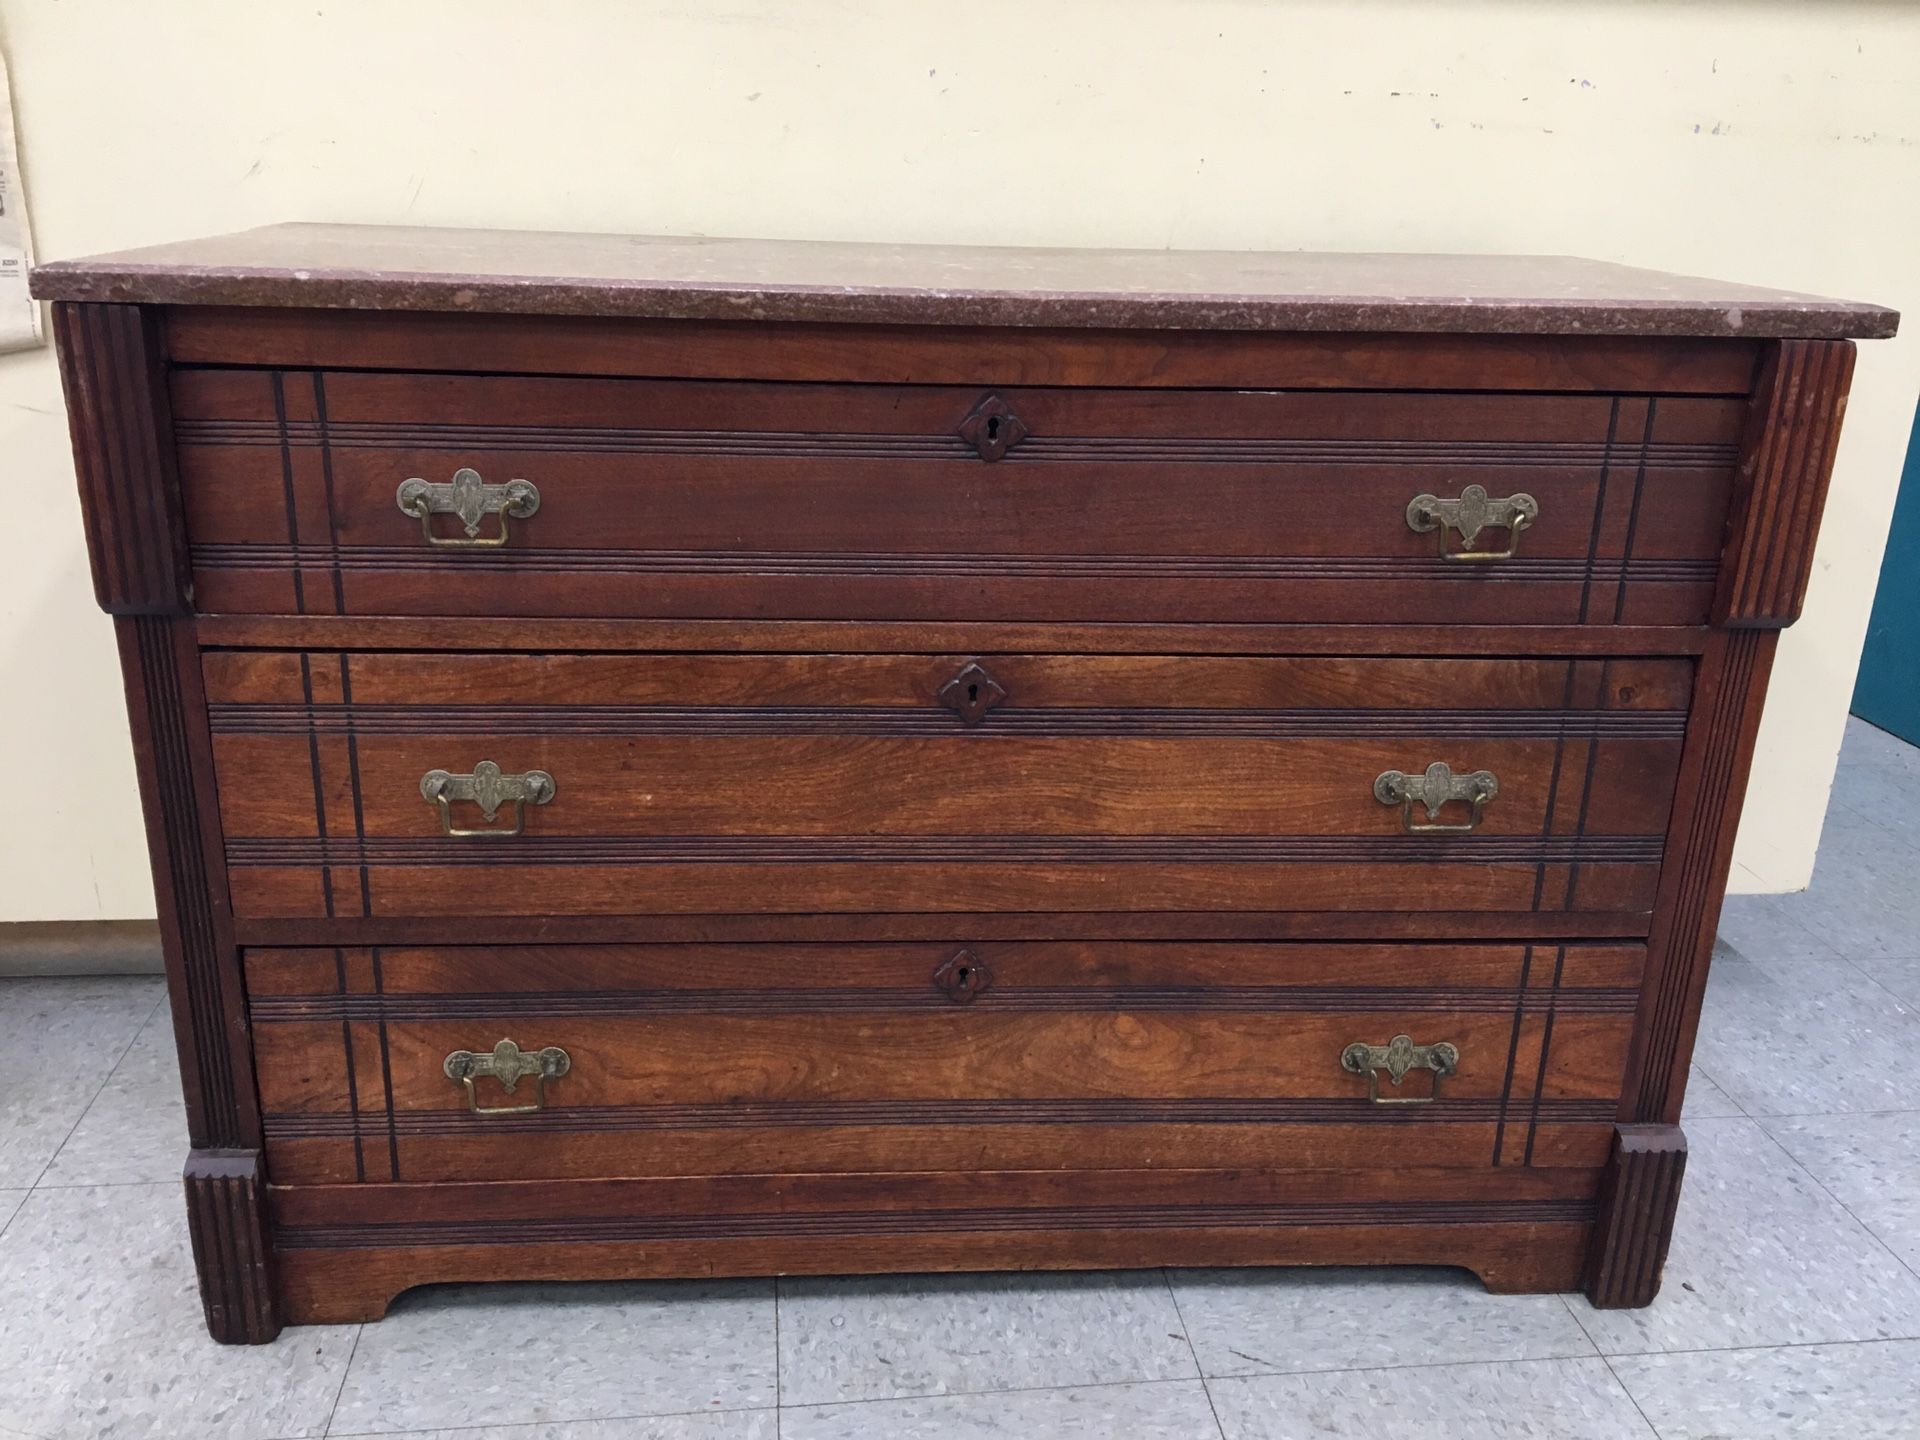 Eastlake antique commode, marble top